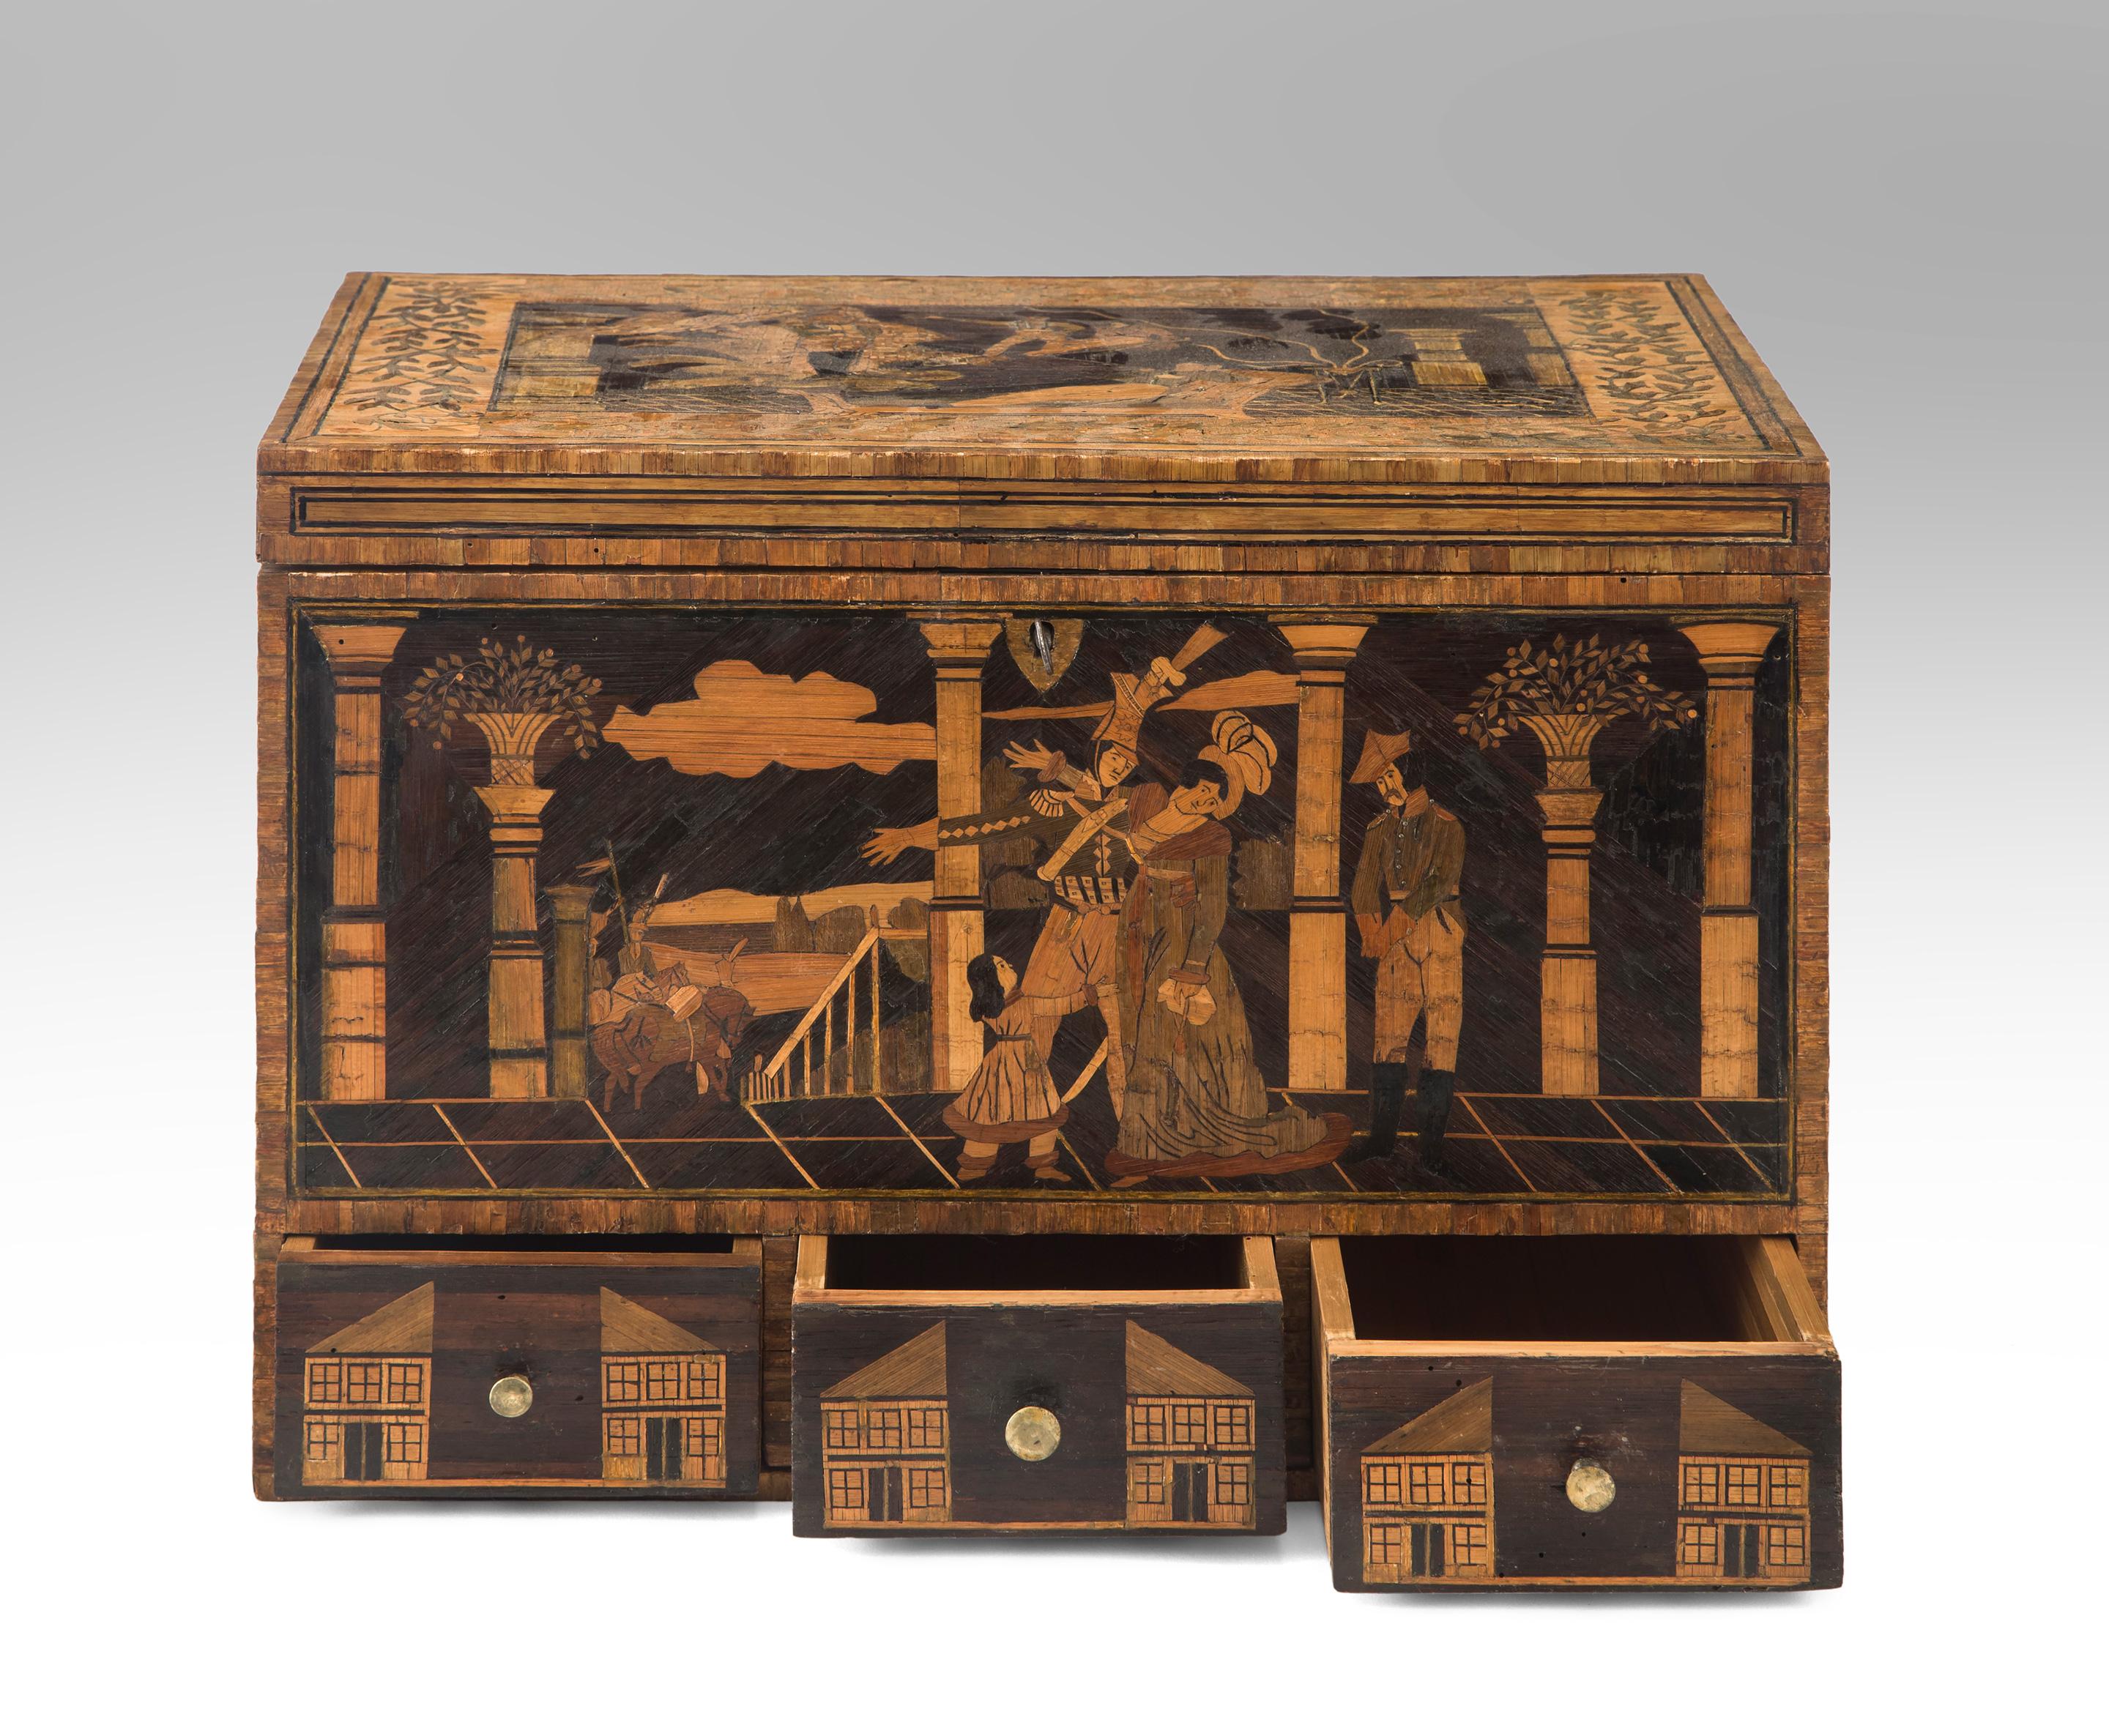 A rare exceptional French straw work box
Early 19th century
An exception box in both its depiction of romantic Napoleonic scenes, quality of execution and remarkable scale. We have seldom seen a straw work box of this size, it's a rarity.